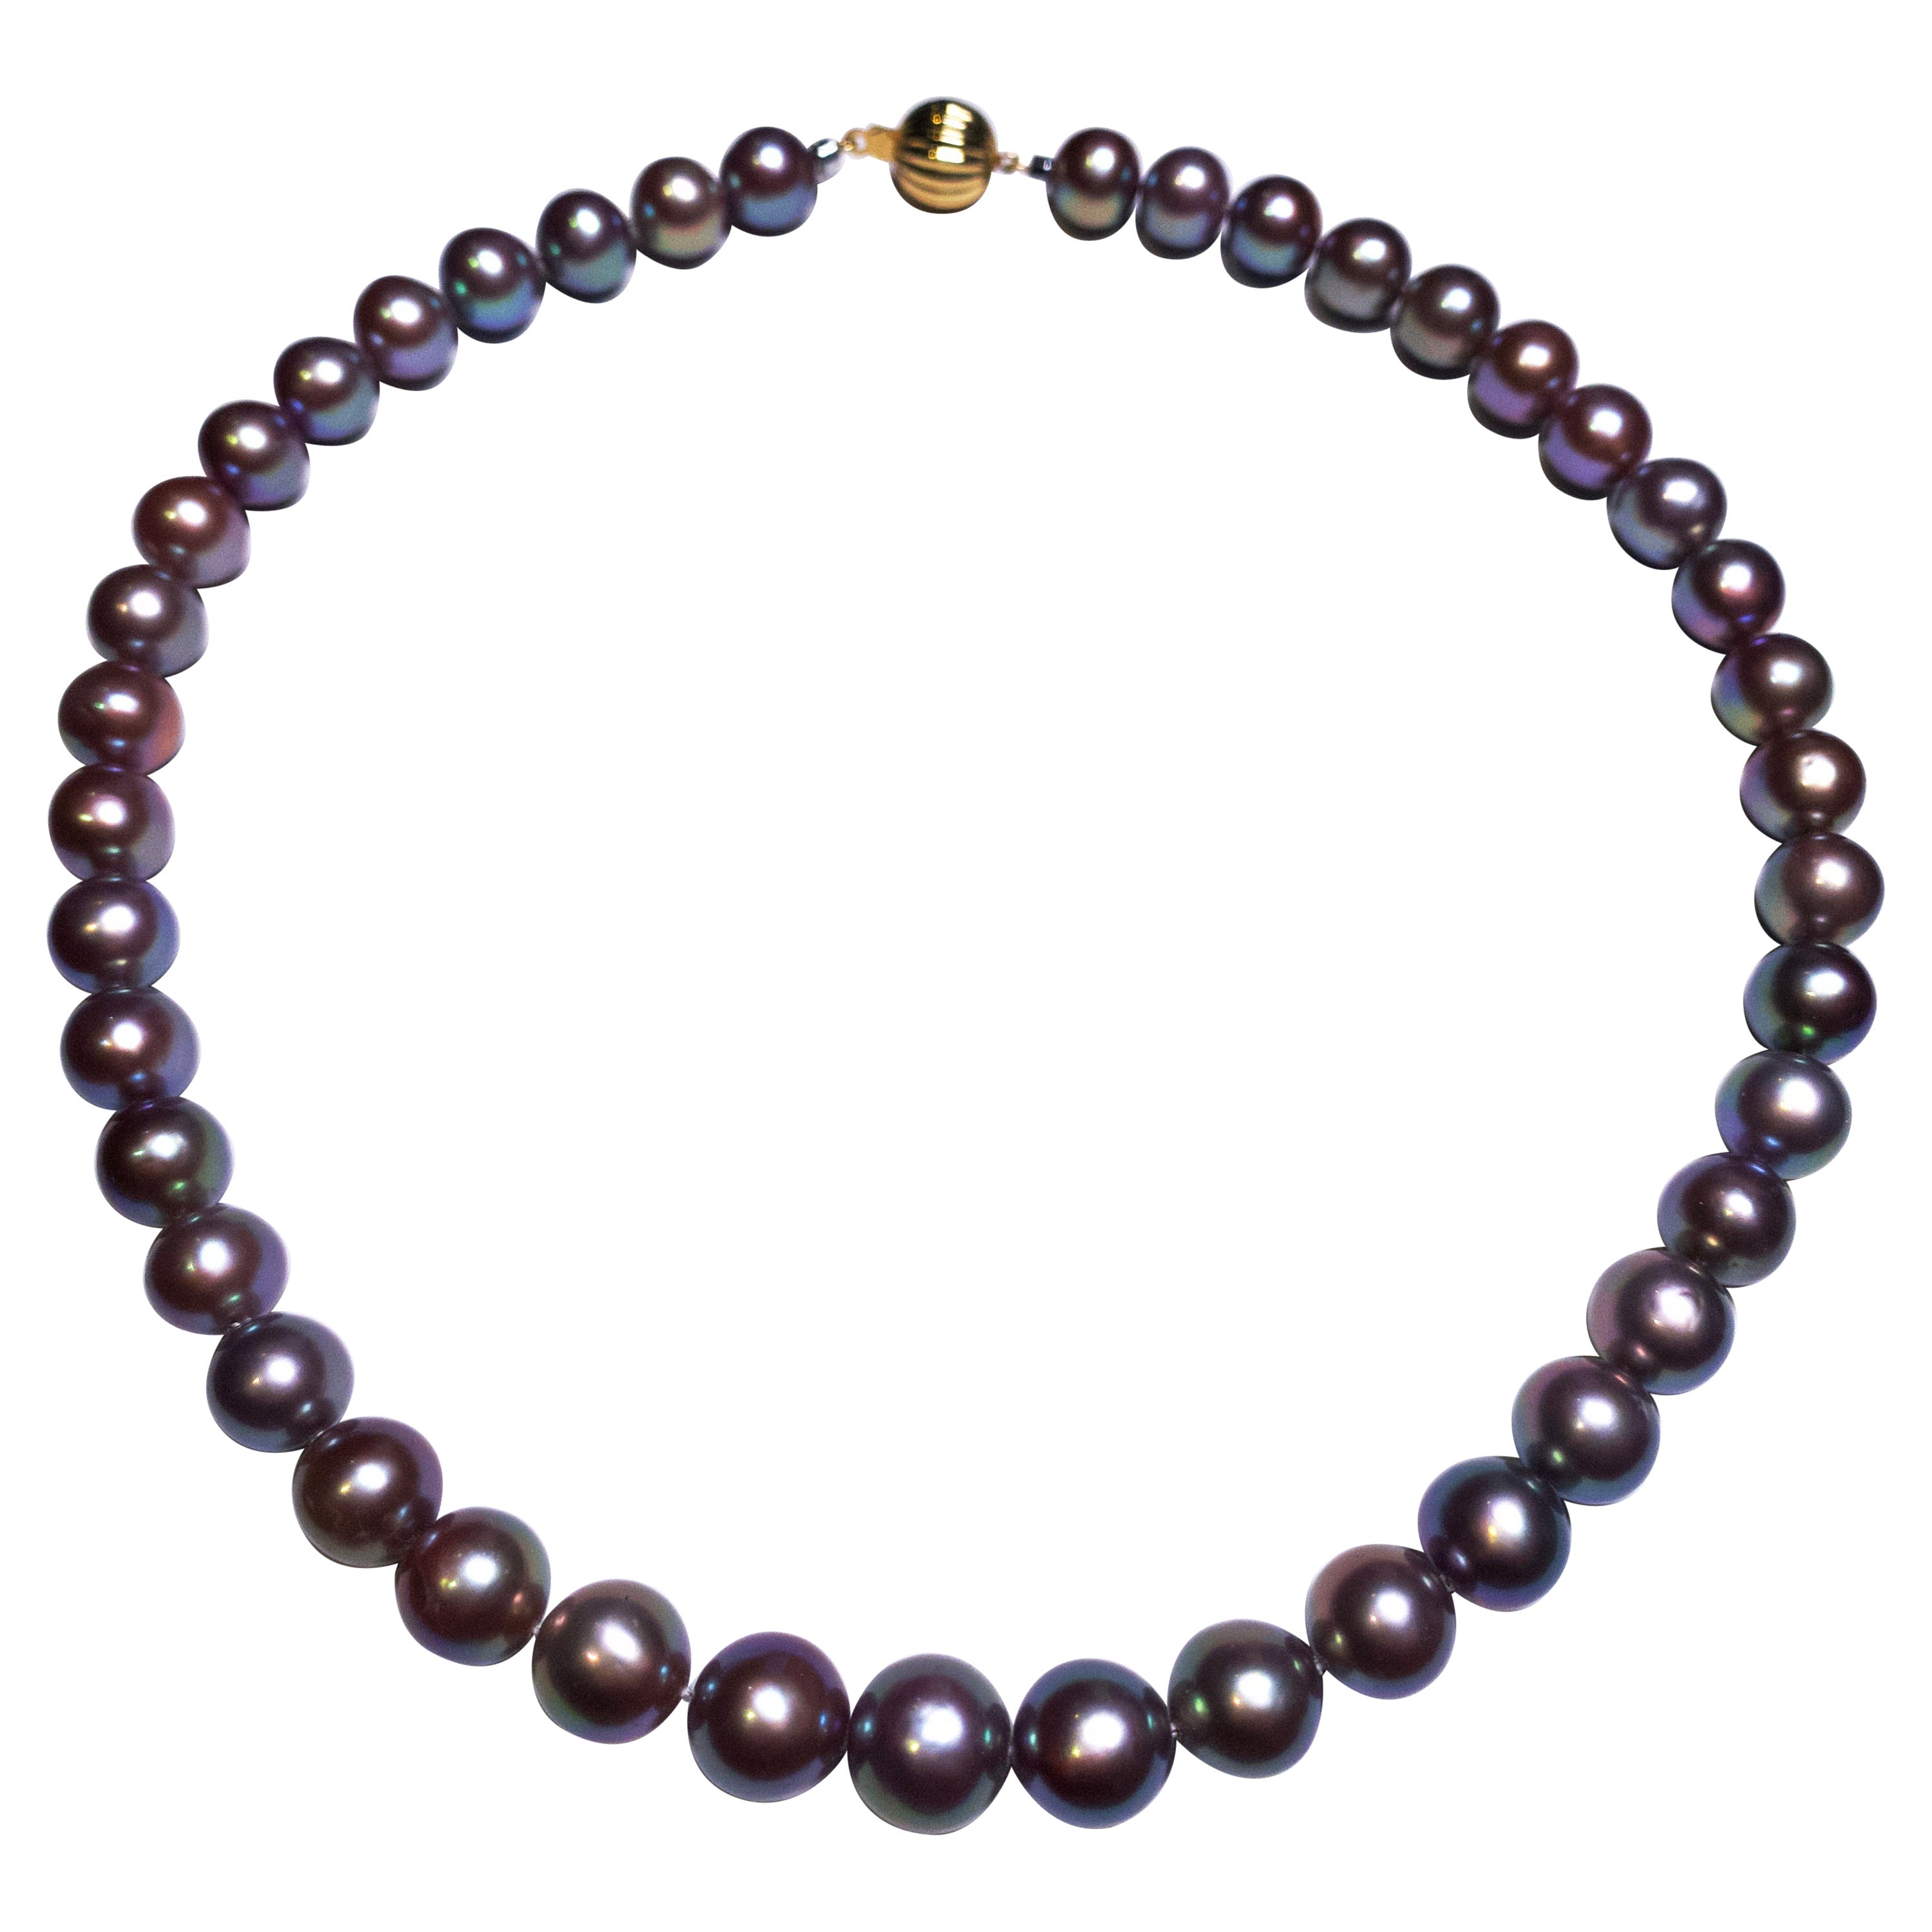 Lavender Colour Freshwater Pearl Necklace with 18k Gold Clasp For Sale